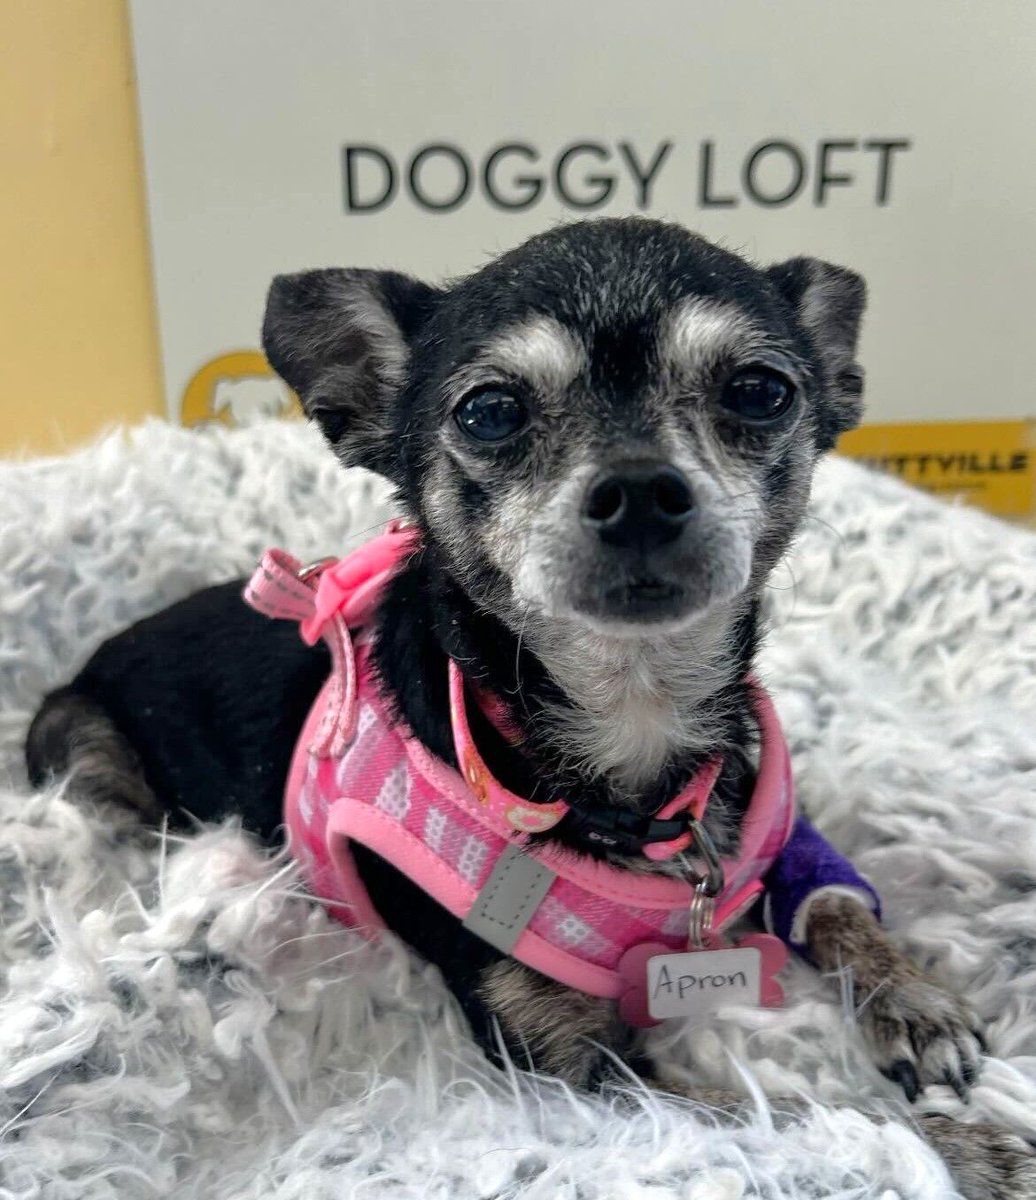 'I'm Apron, I've just arrived. This Doggy Loft thing is nice! Way better than the streets of Sacramento. 😒 I heard them say my photo will be on a website soon and that someone will fall in love with me.' 💗 
Meet #senior dogs today, 11-2, 255 Alabama St in #SanFrancisco 🎉